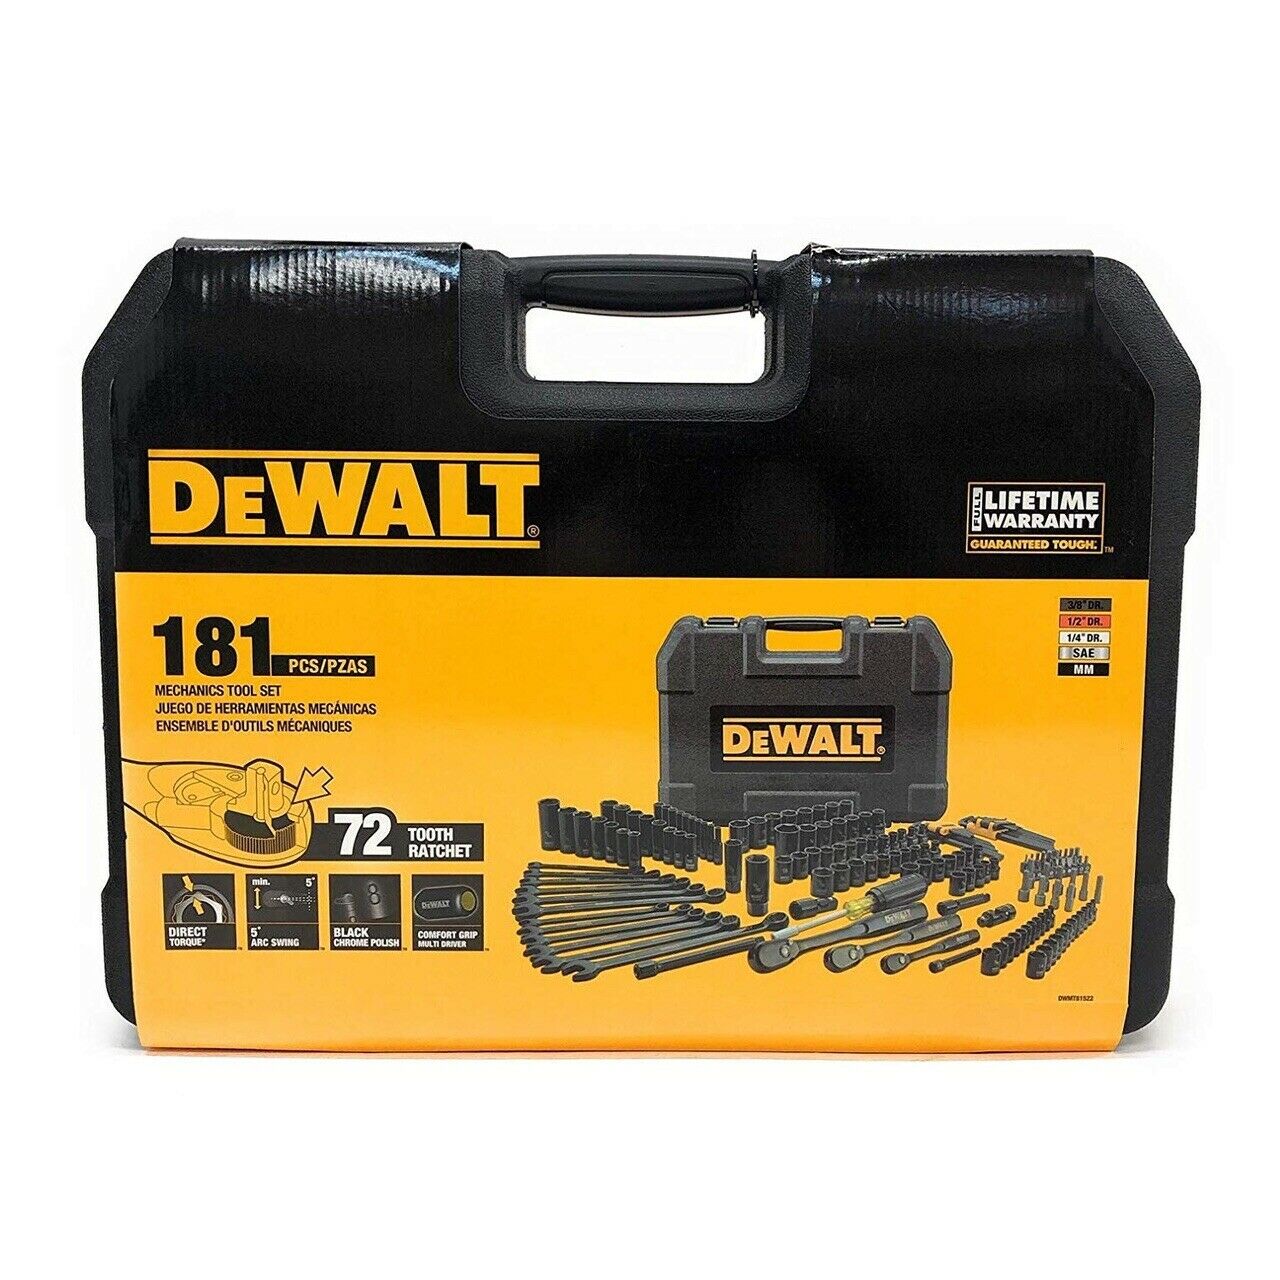 DEWALT 1/4 in. x 1-1/2 in. 18-Gauge Glue Collated Crown Staple 2 Boxes  (2500 Per Box) DNS18150-2X2 - The Home Depot